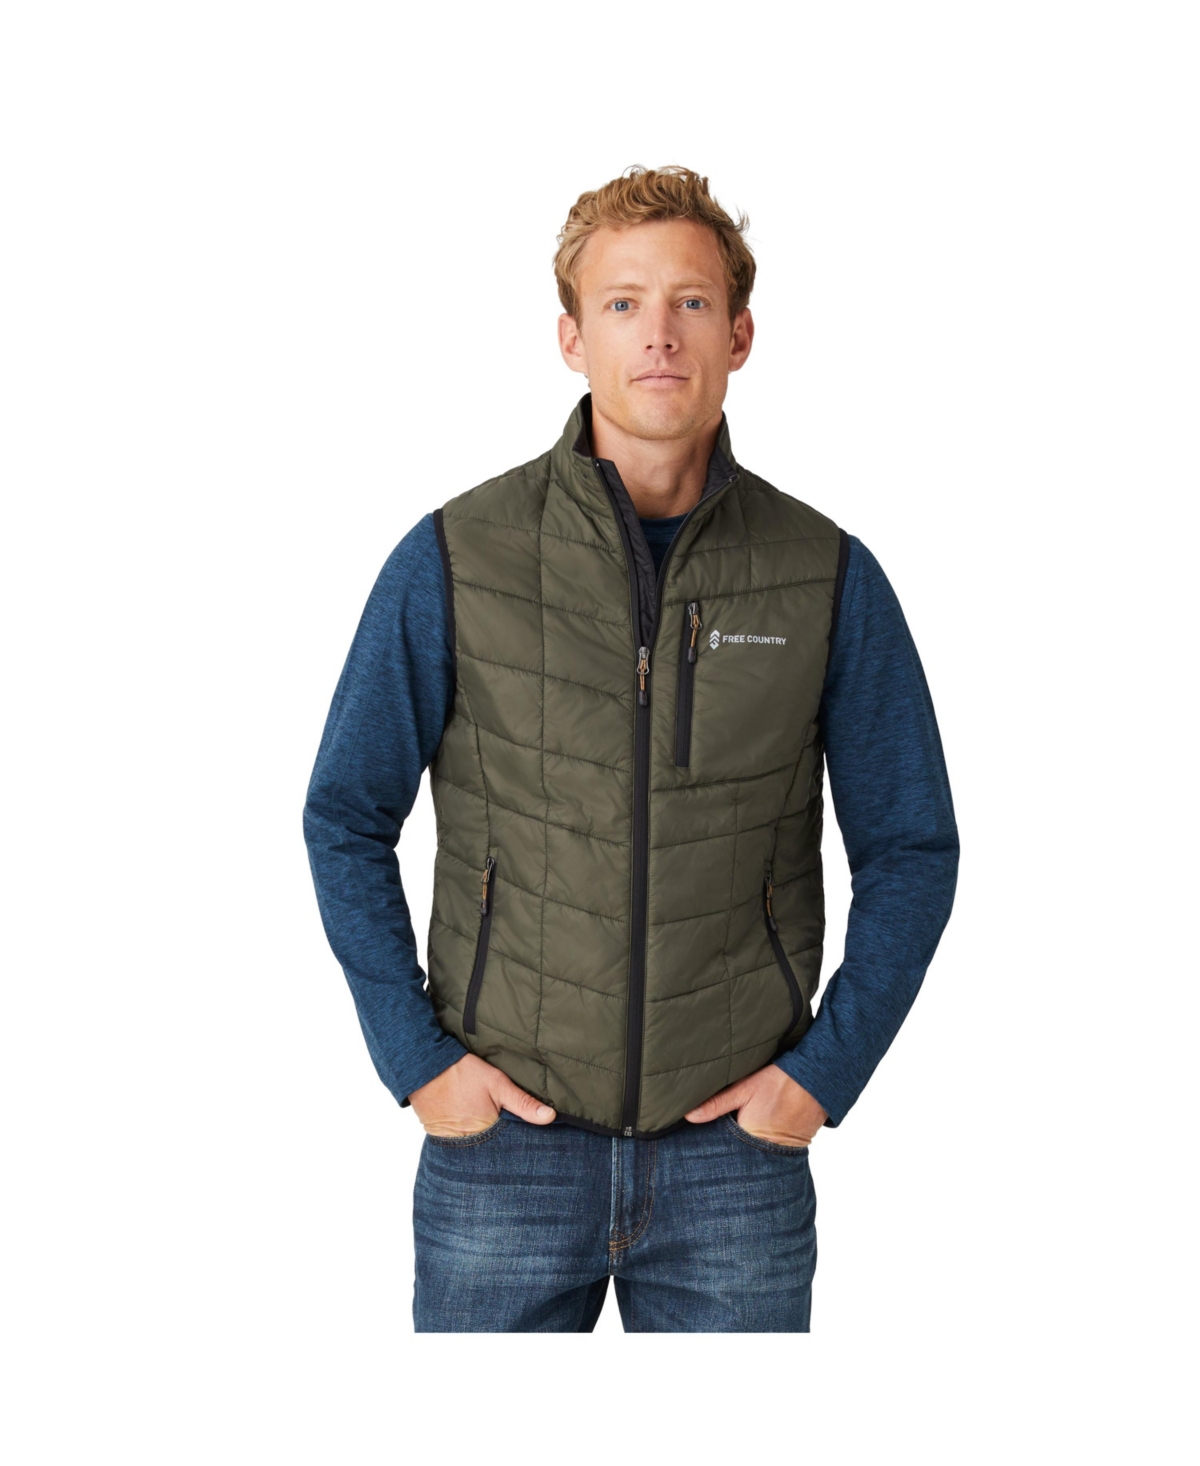 Men's FreeCycle Stimson Puffer Vest - Duffle olive